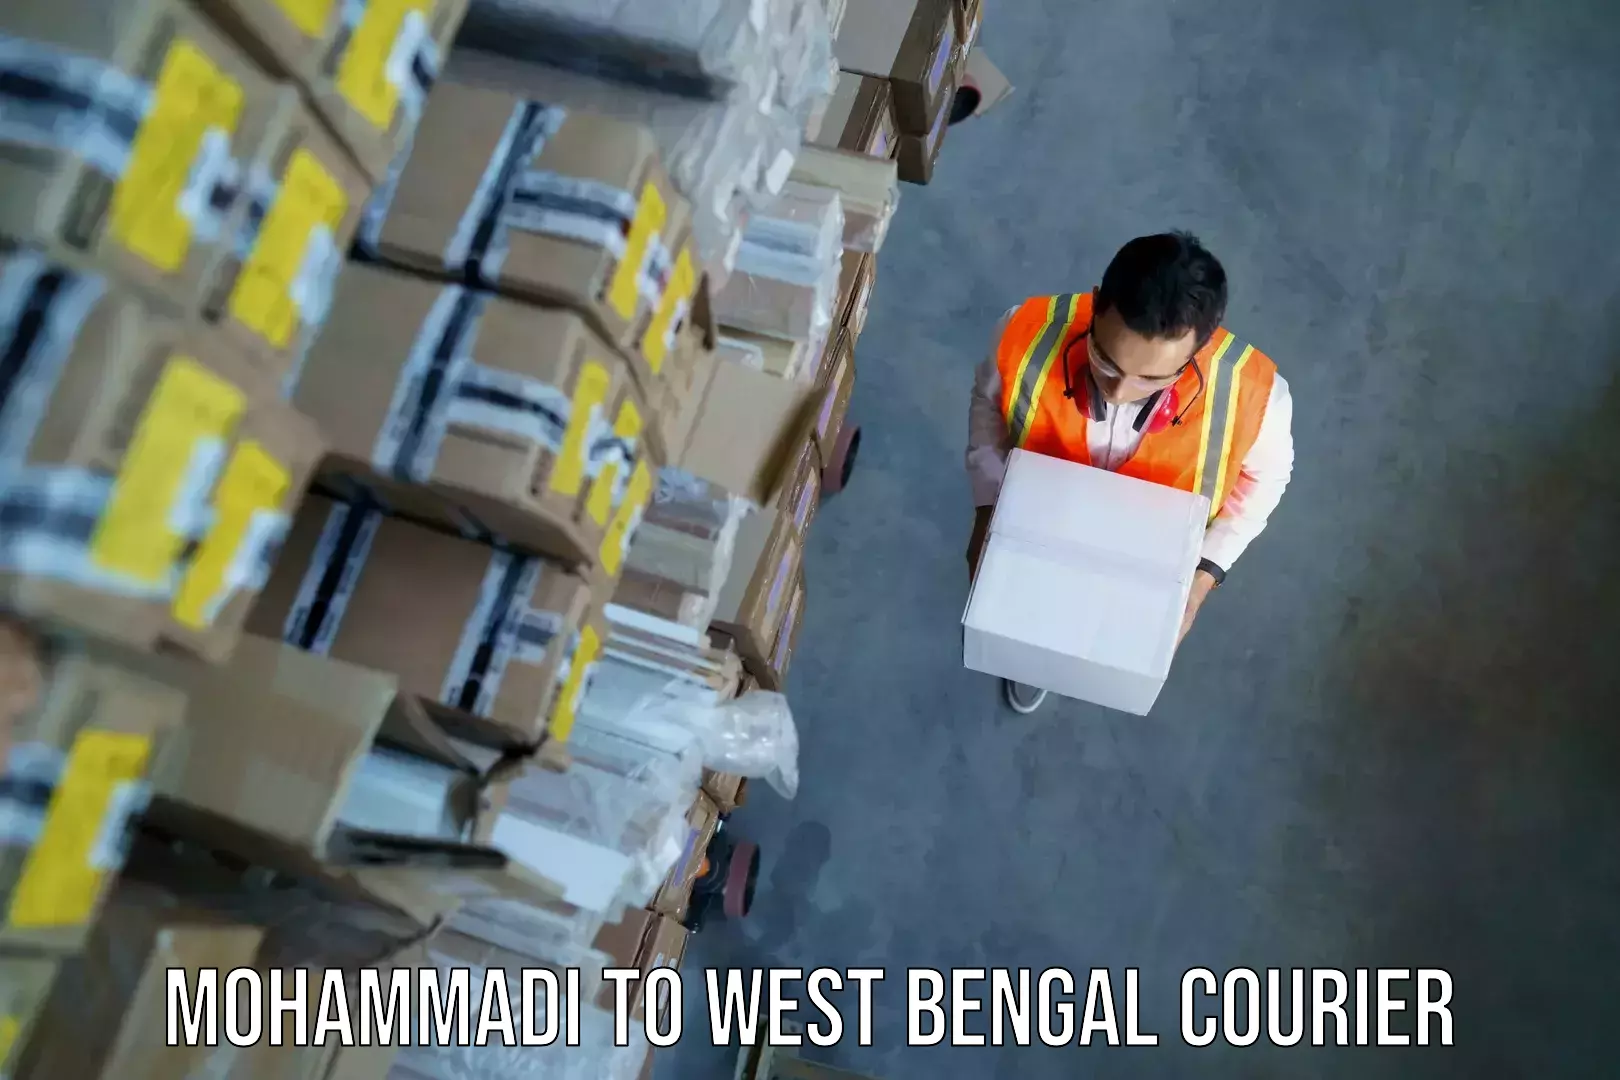 Luggage shipment specialists Mohammadi to West Bengal